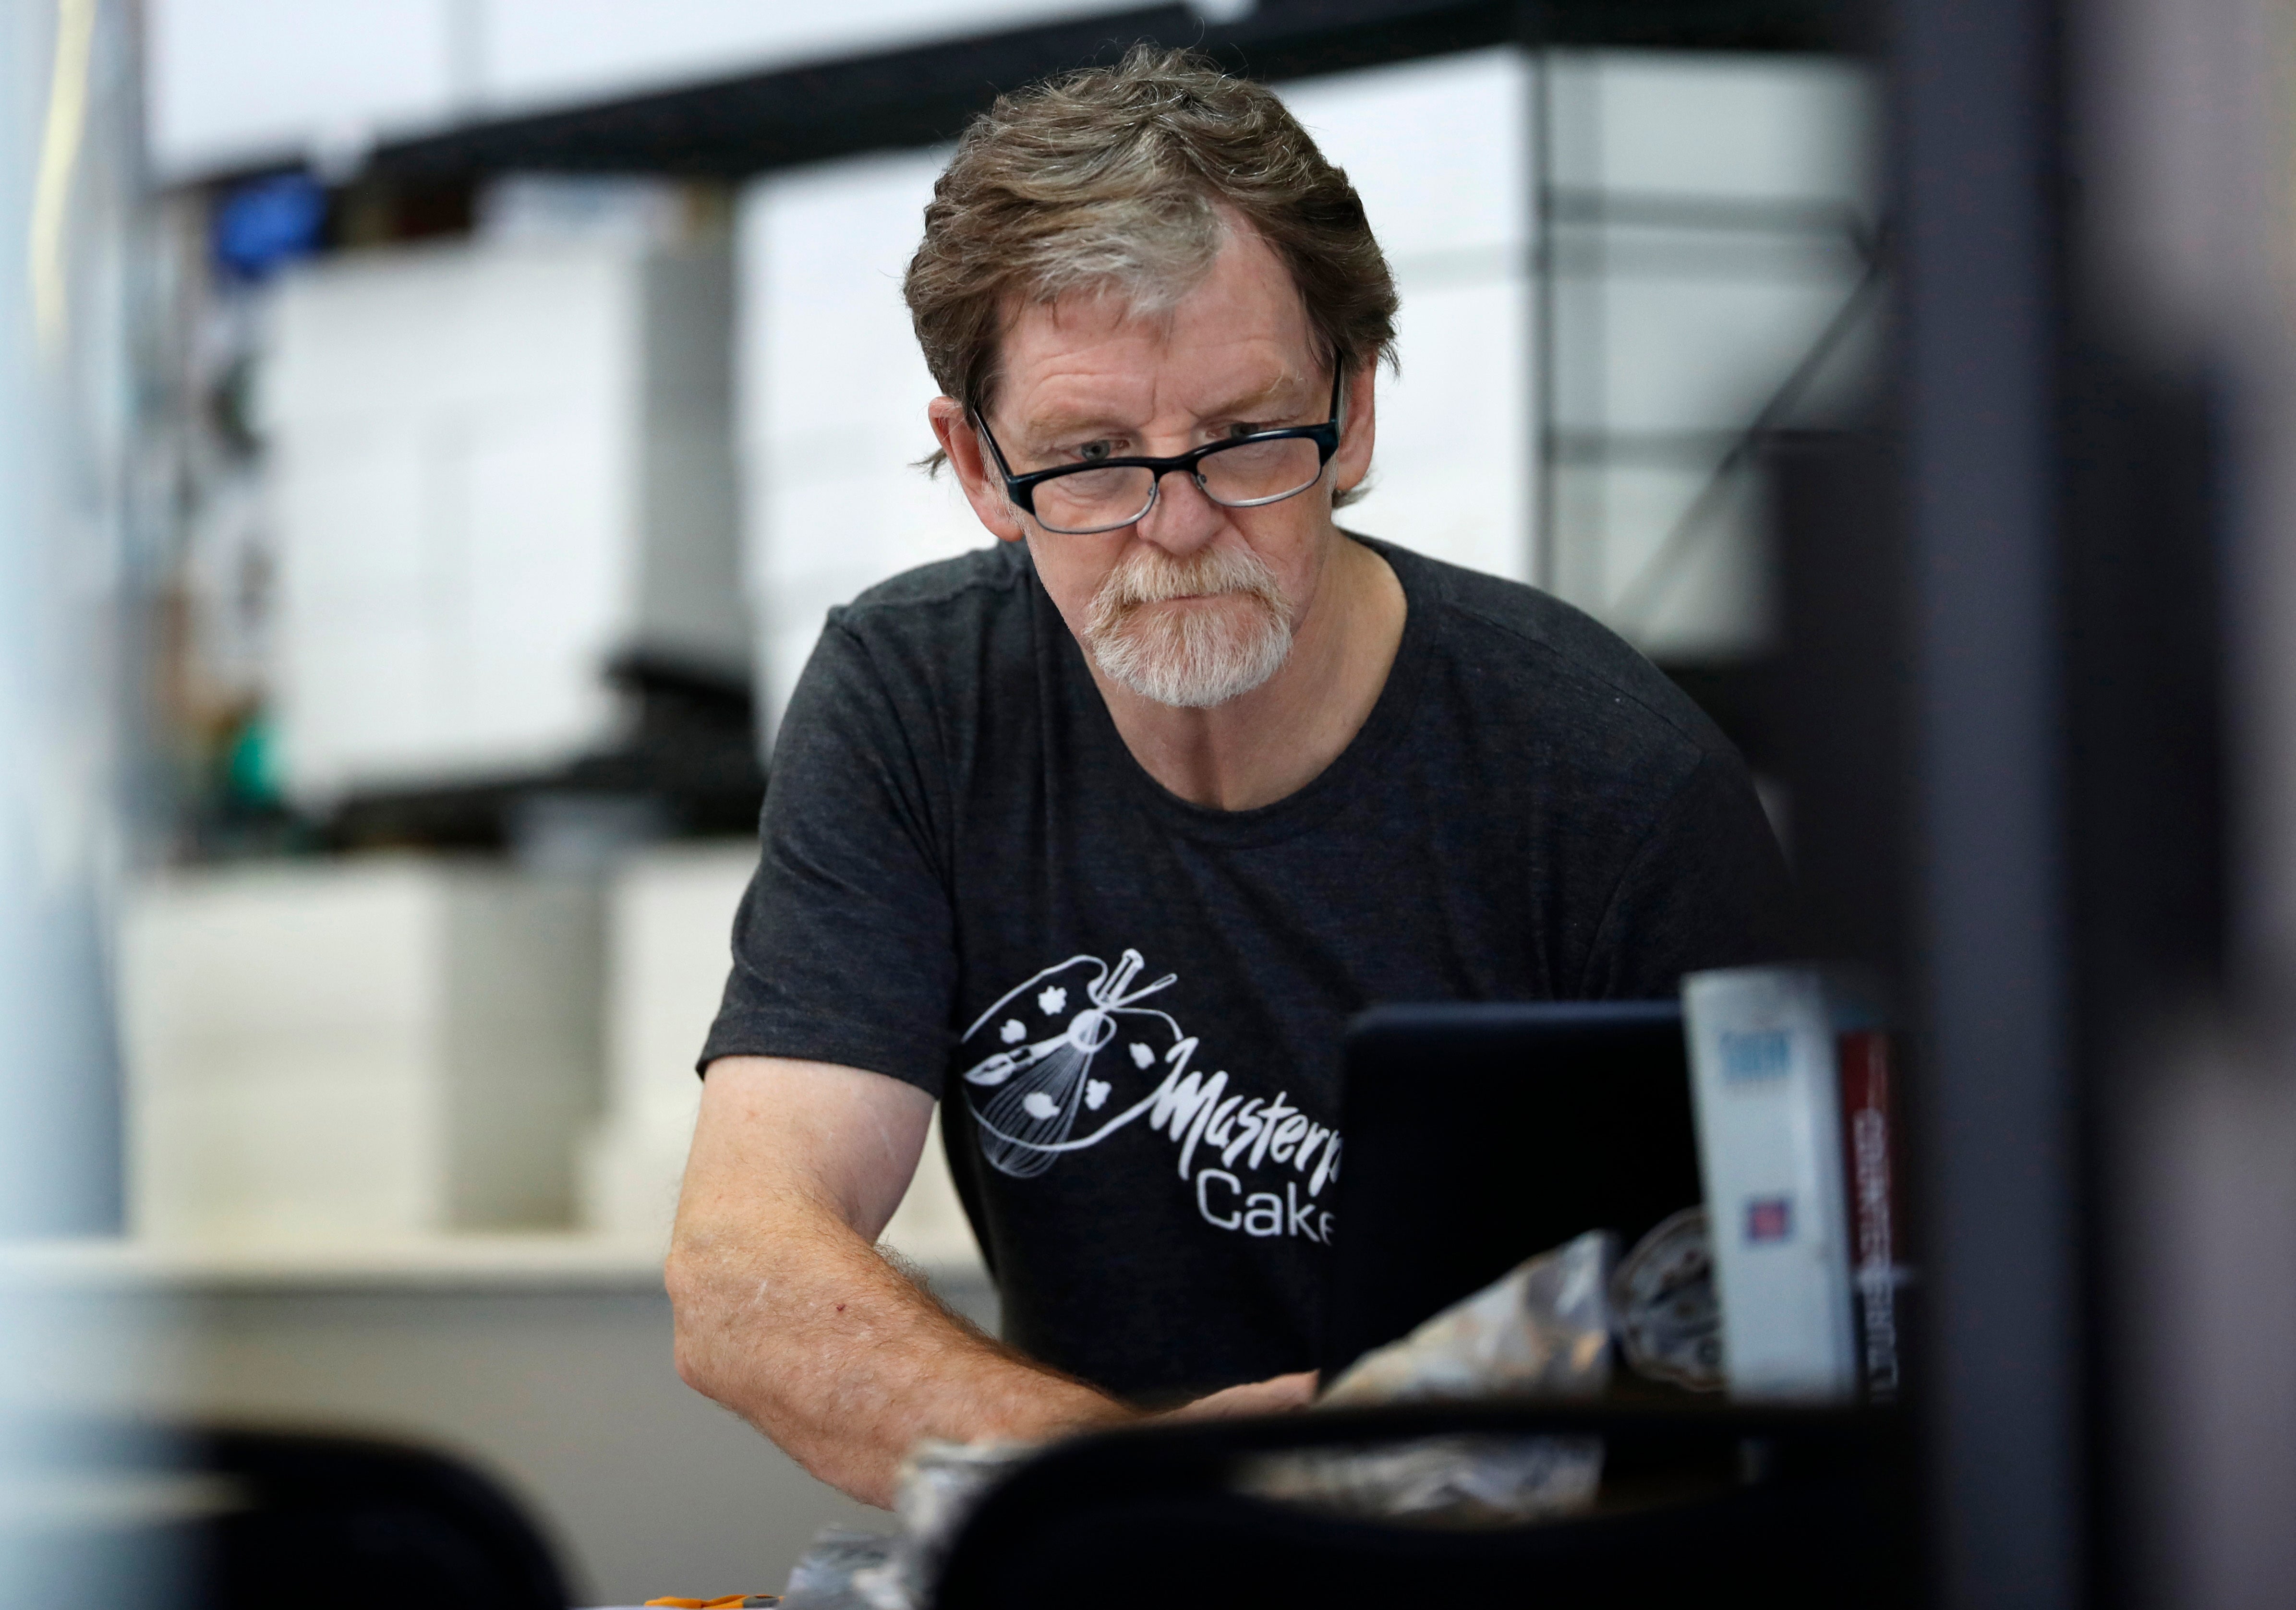 Colorado baker Jack Phillips is in court again, this time over a transgender woman’s birthday cake